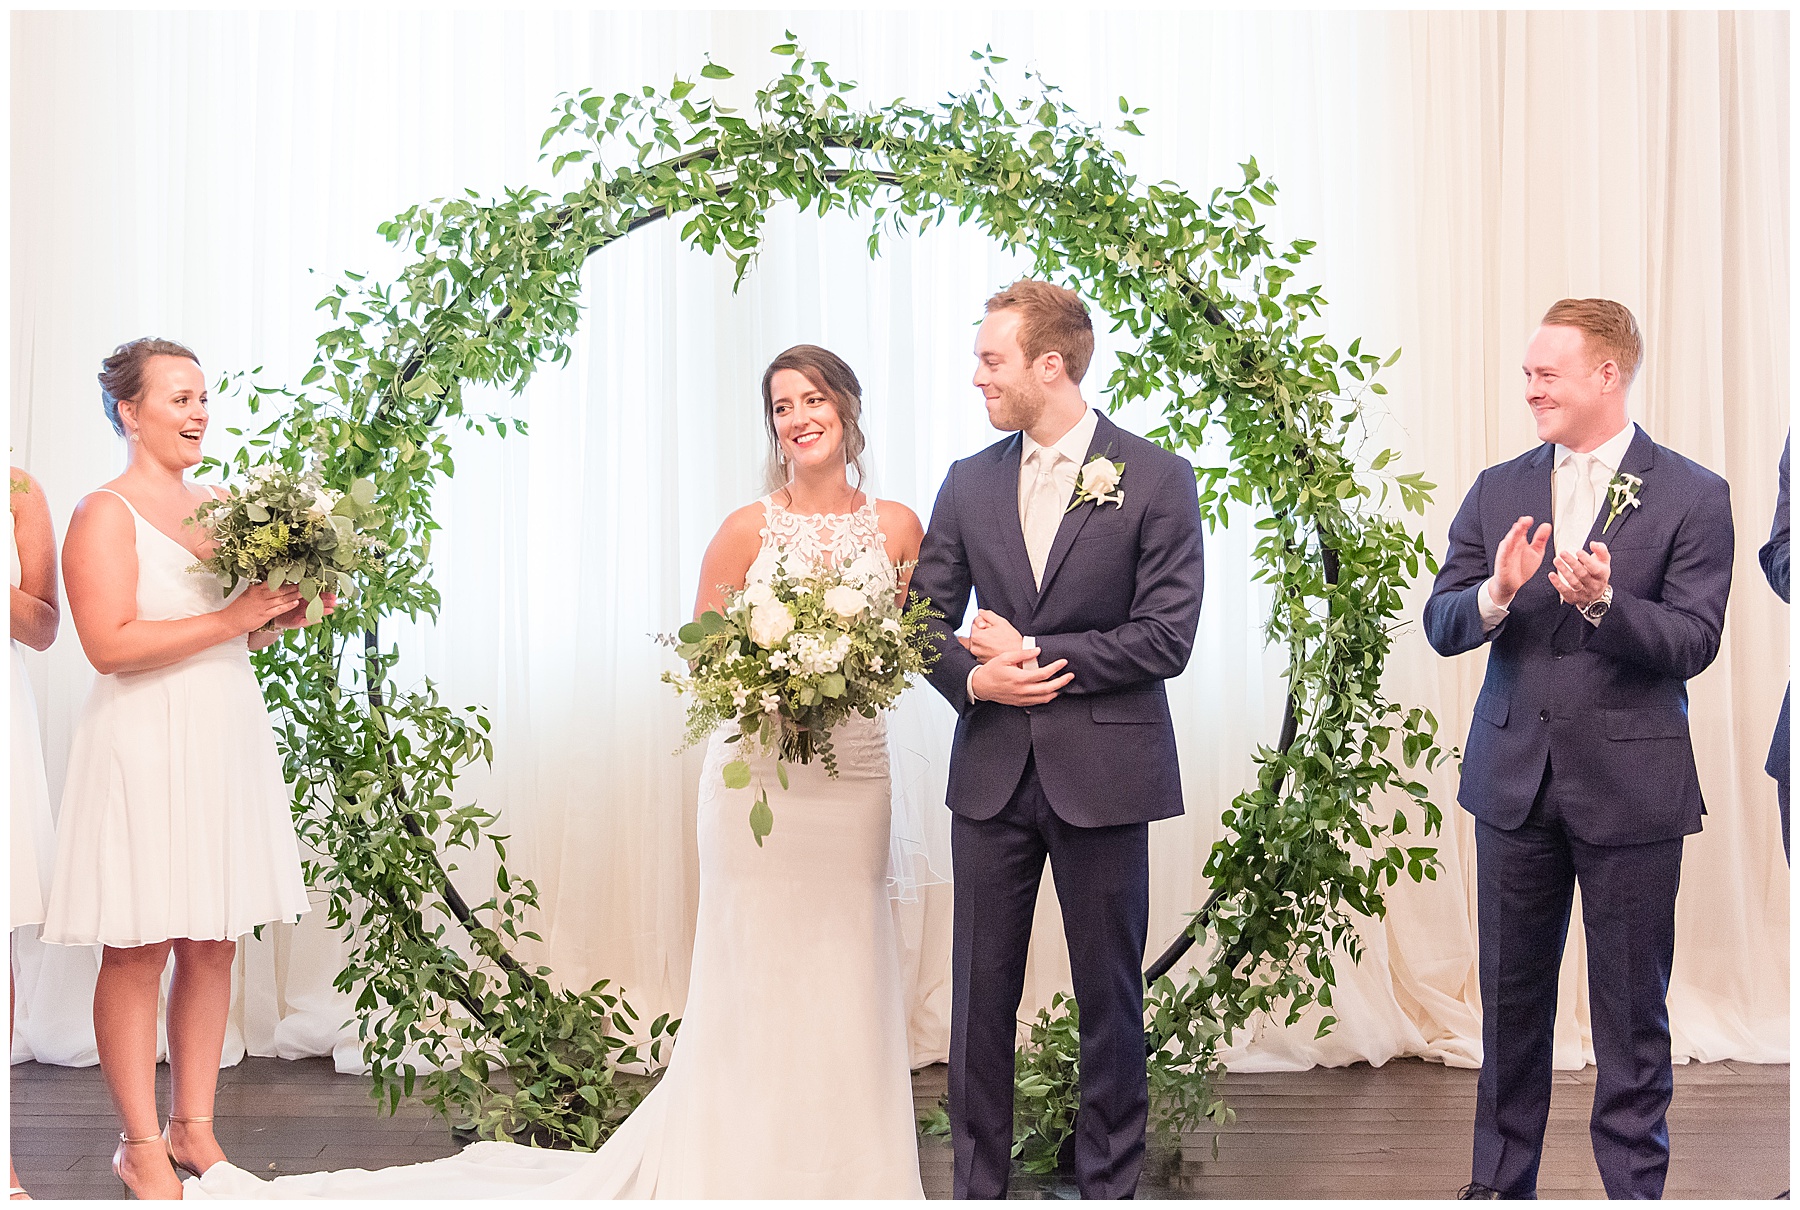 Bride and groom smiling at guests after sharing first kiss under floral hoop in my wedding photography favorites